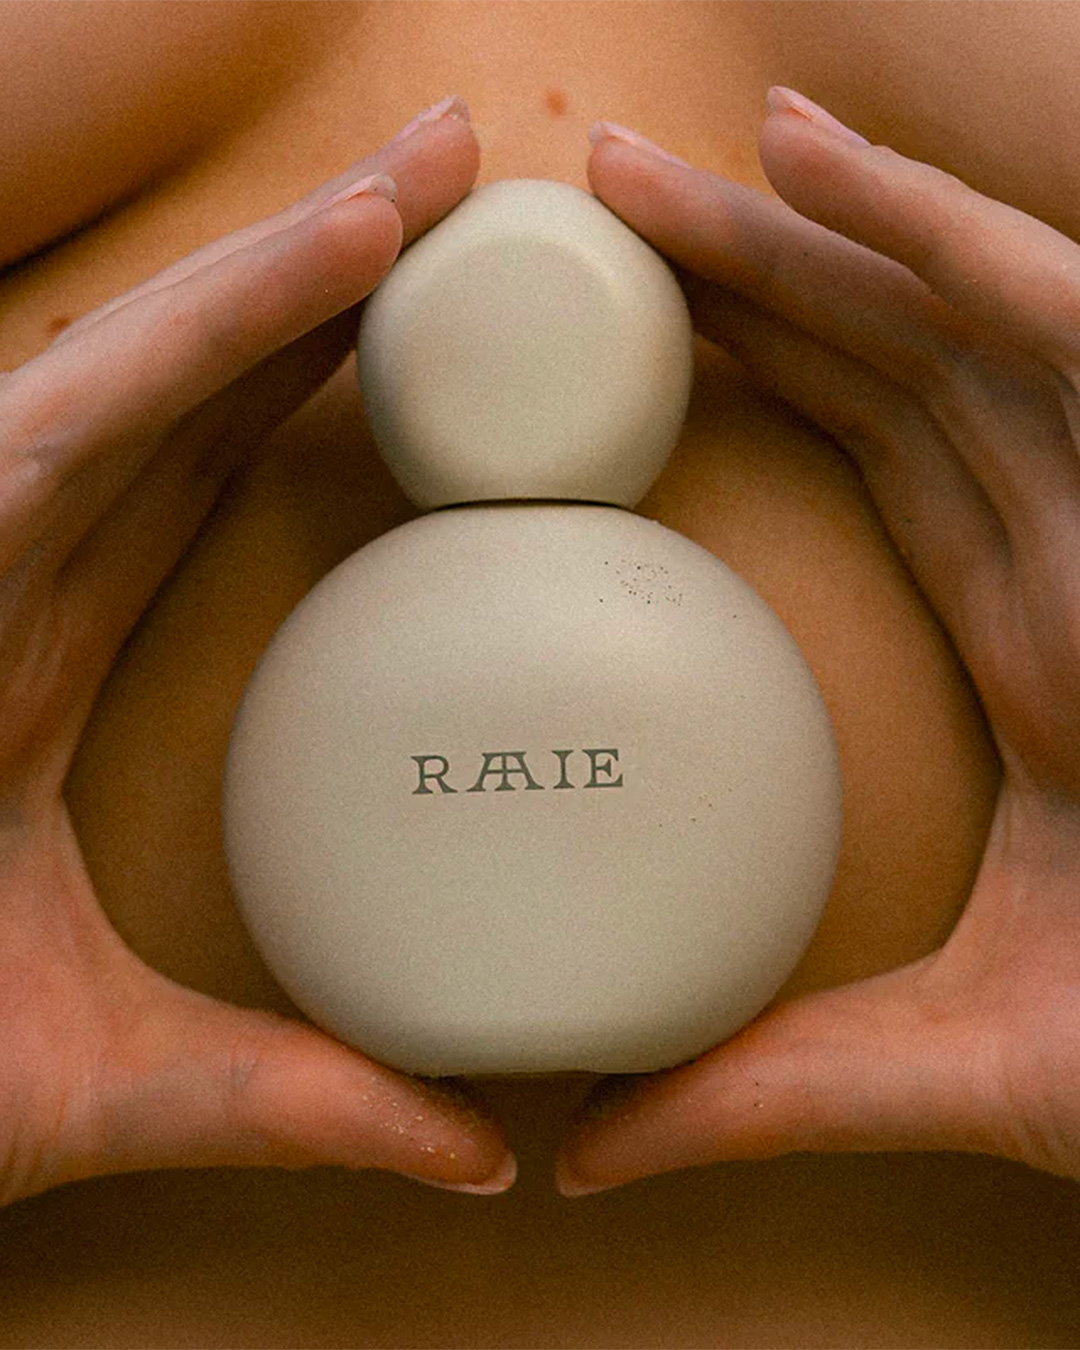 Someone holds a bottle of Raaie Skincare.